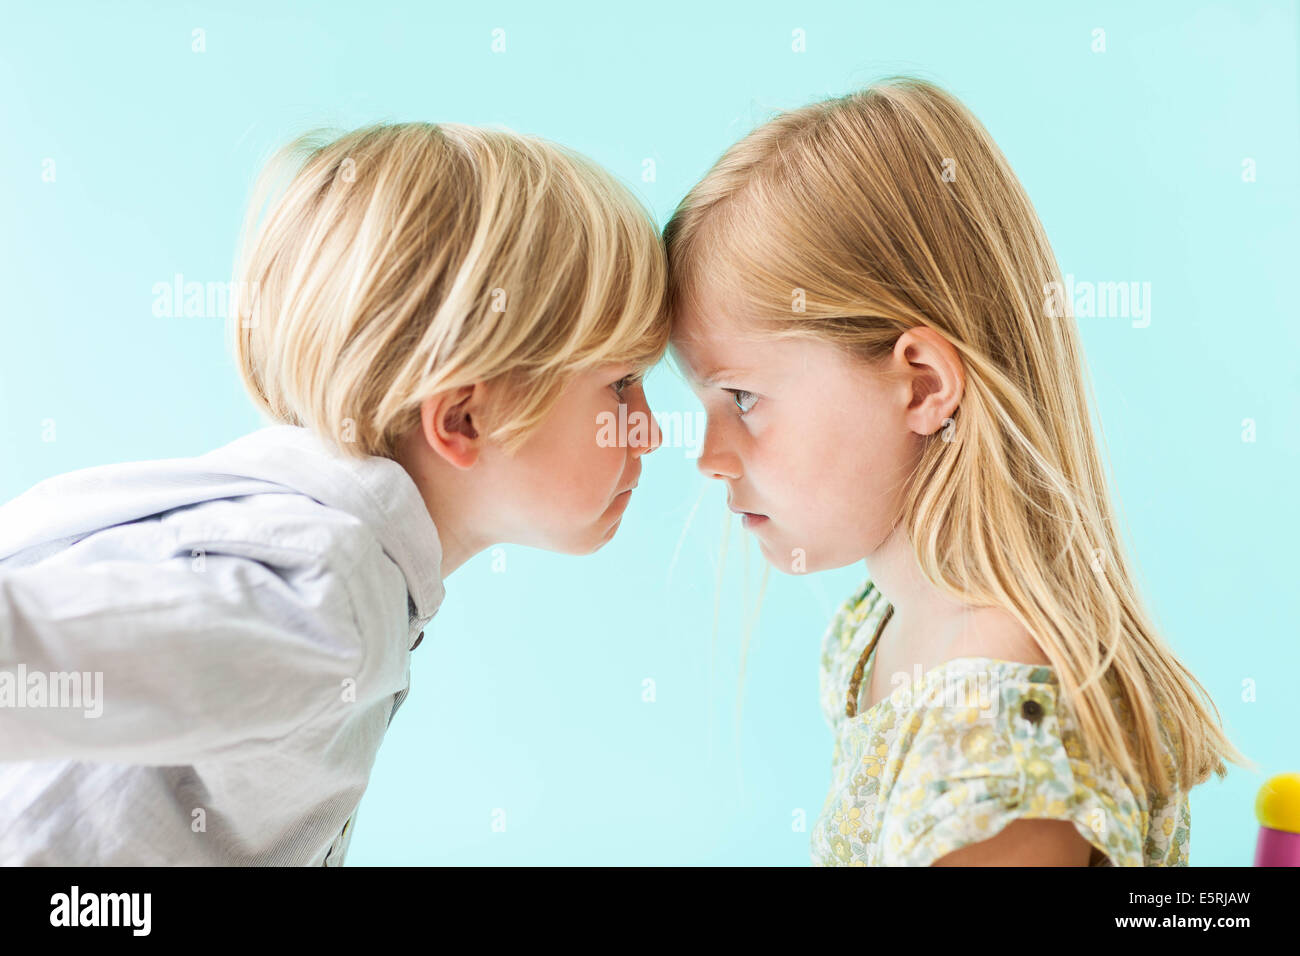 5 and 7 year old brother and sister. Stock Photo